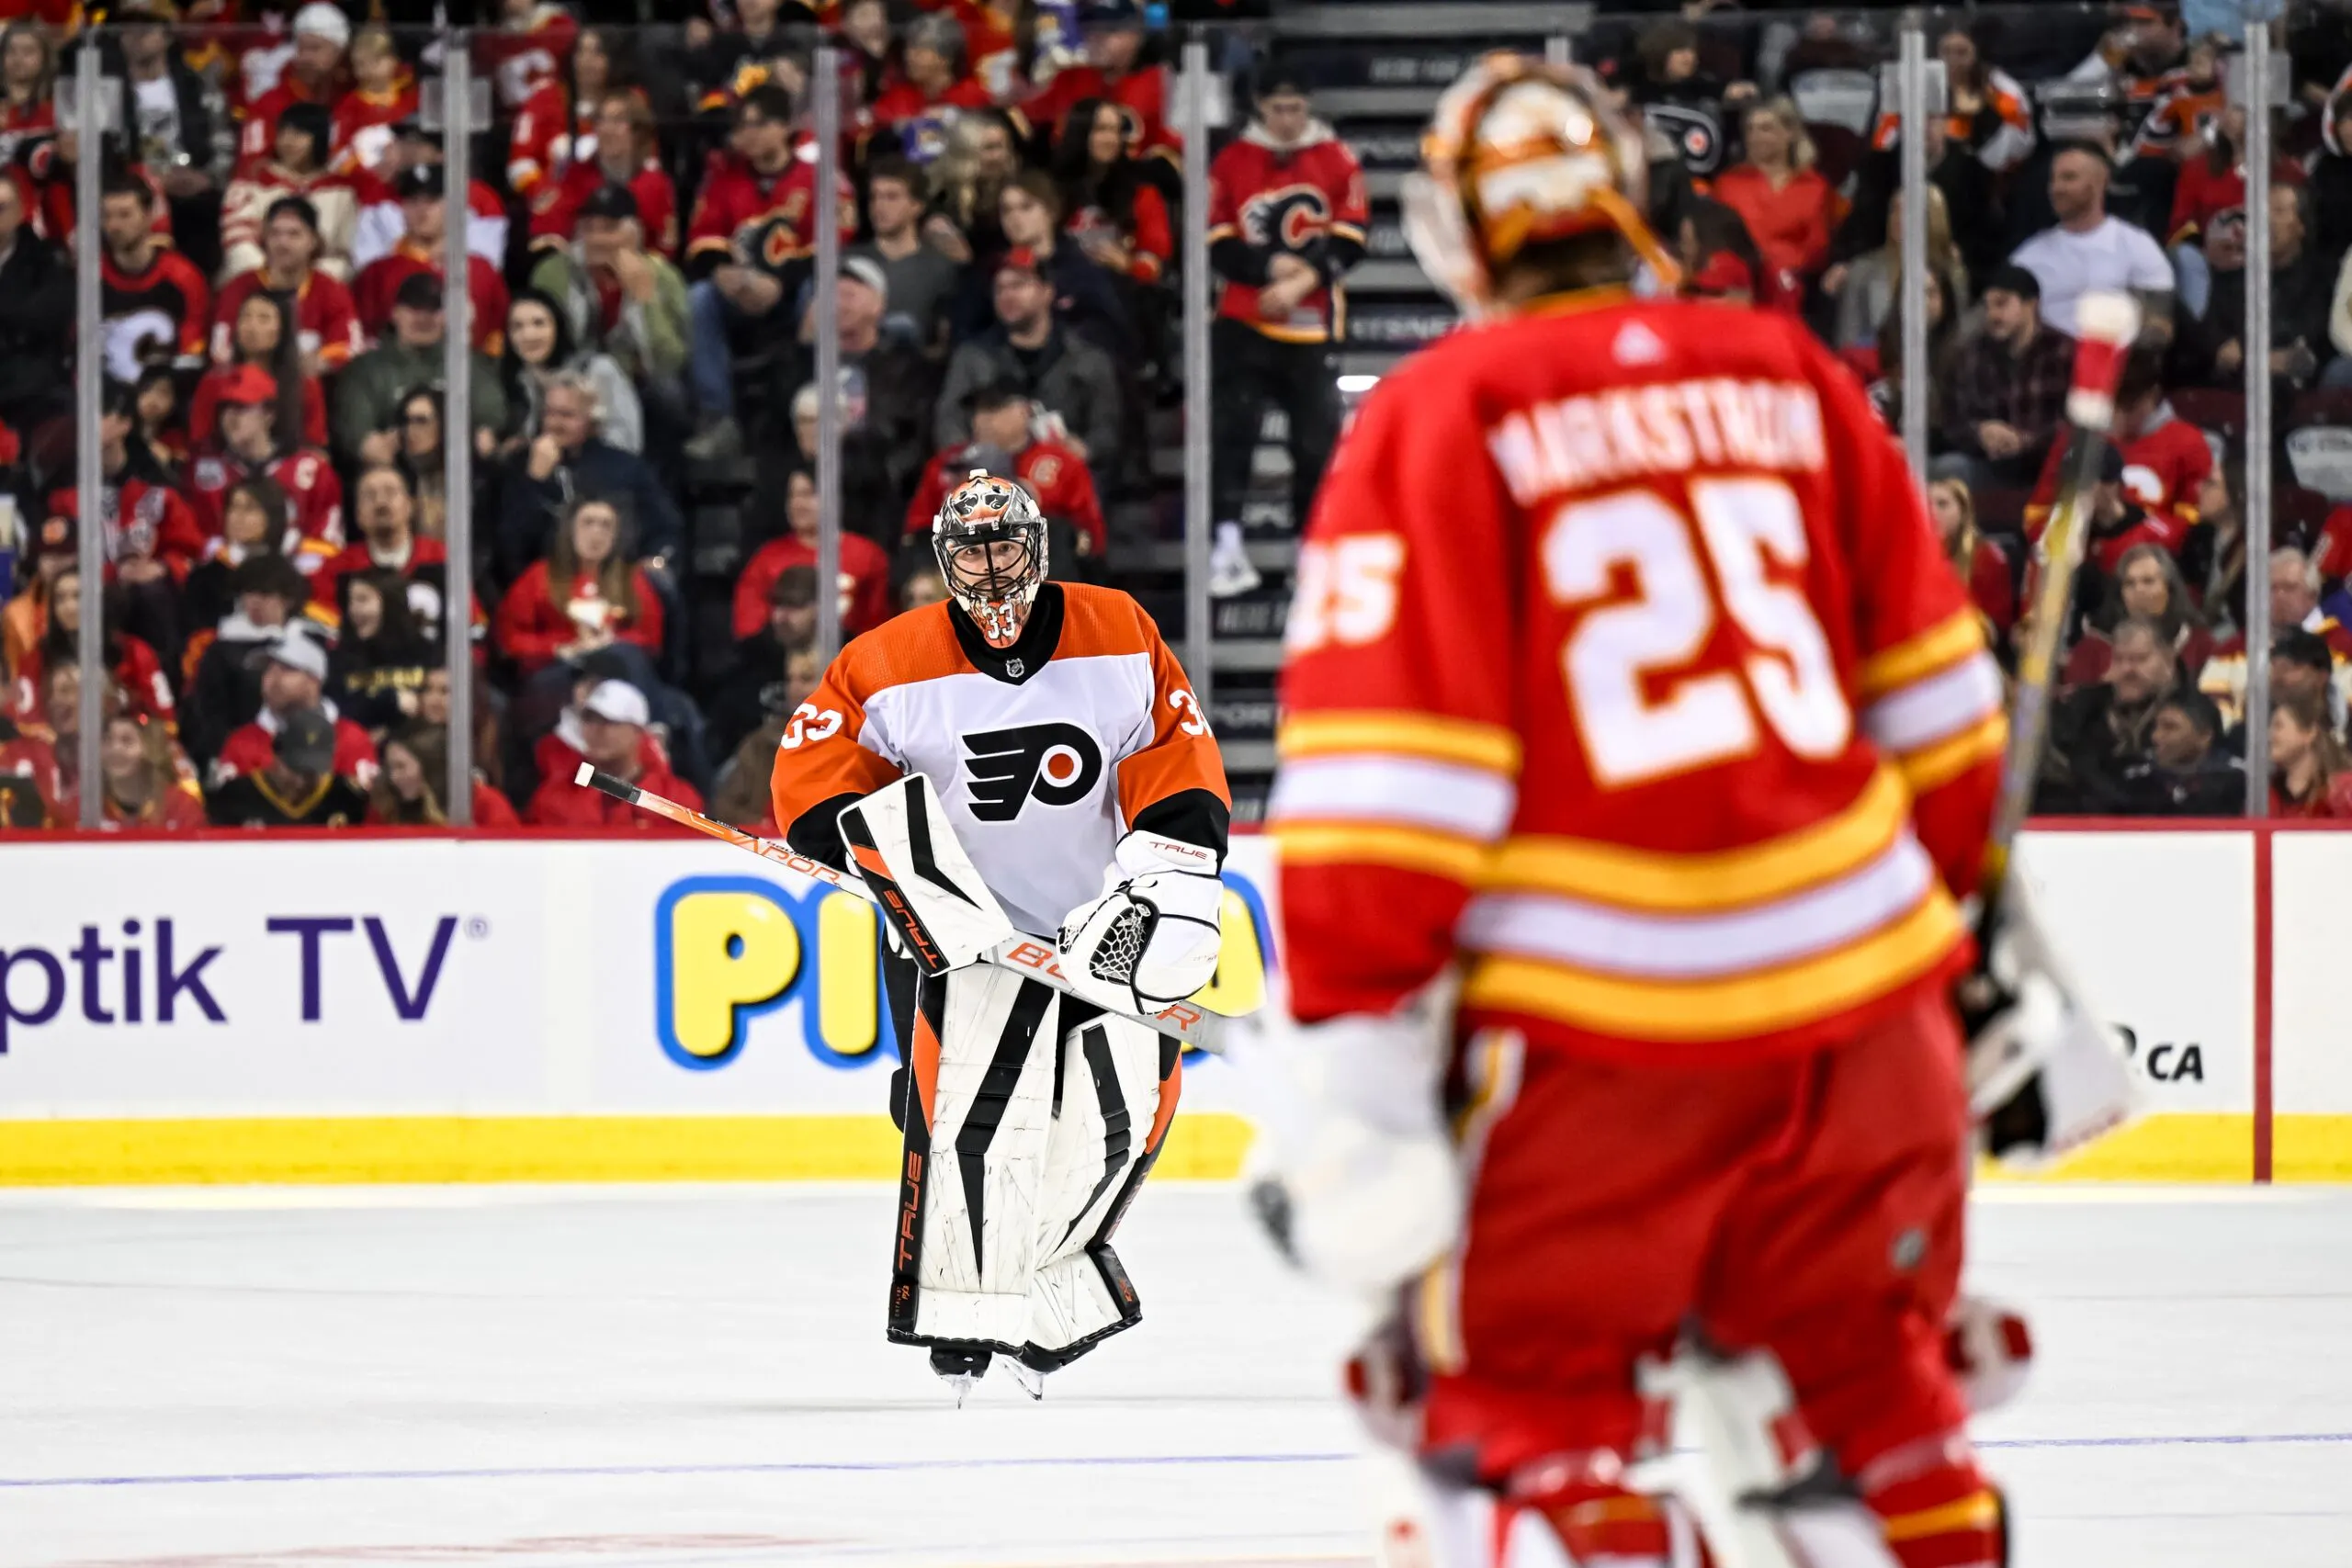 The Calgary Flames defeated the Philadelphia Flyers 4-3 to start the new year